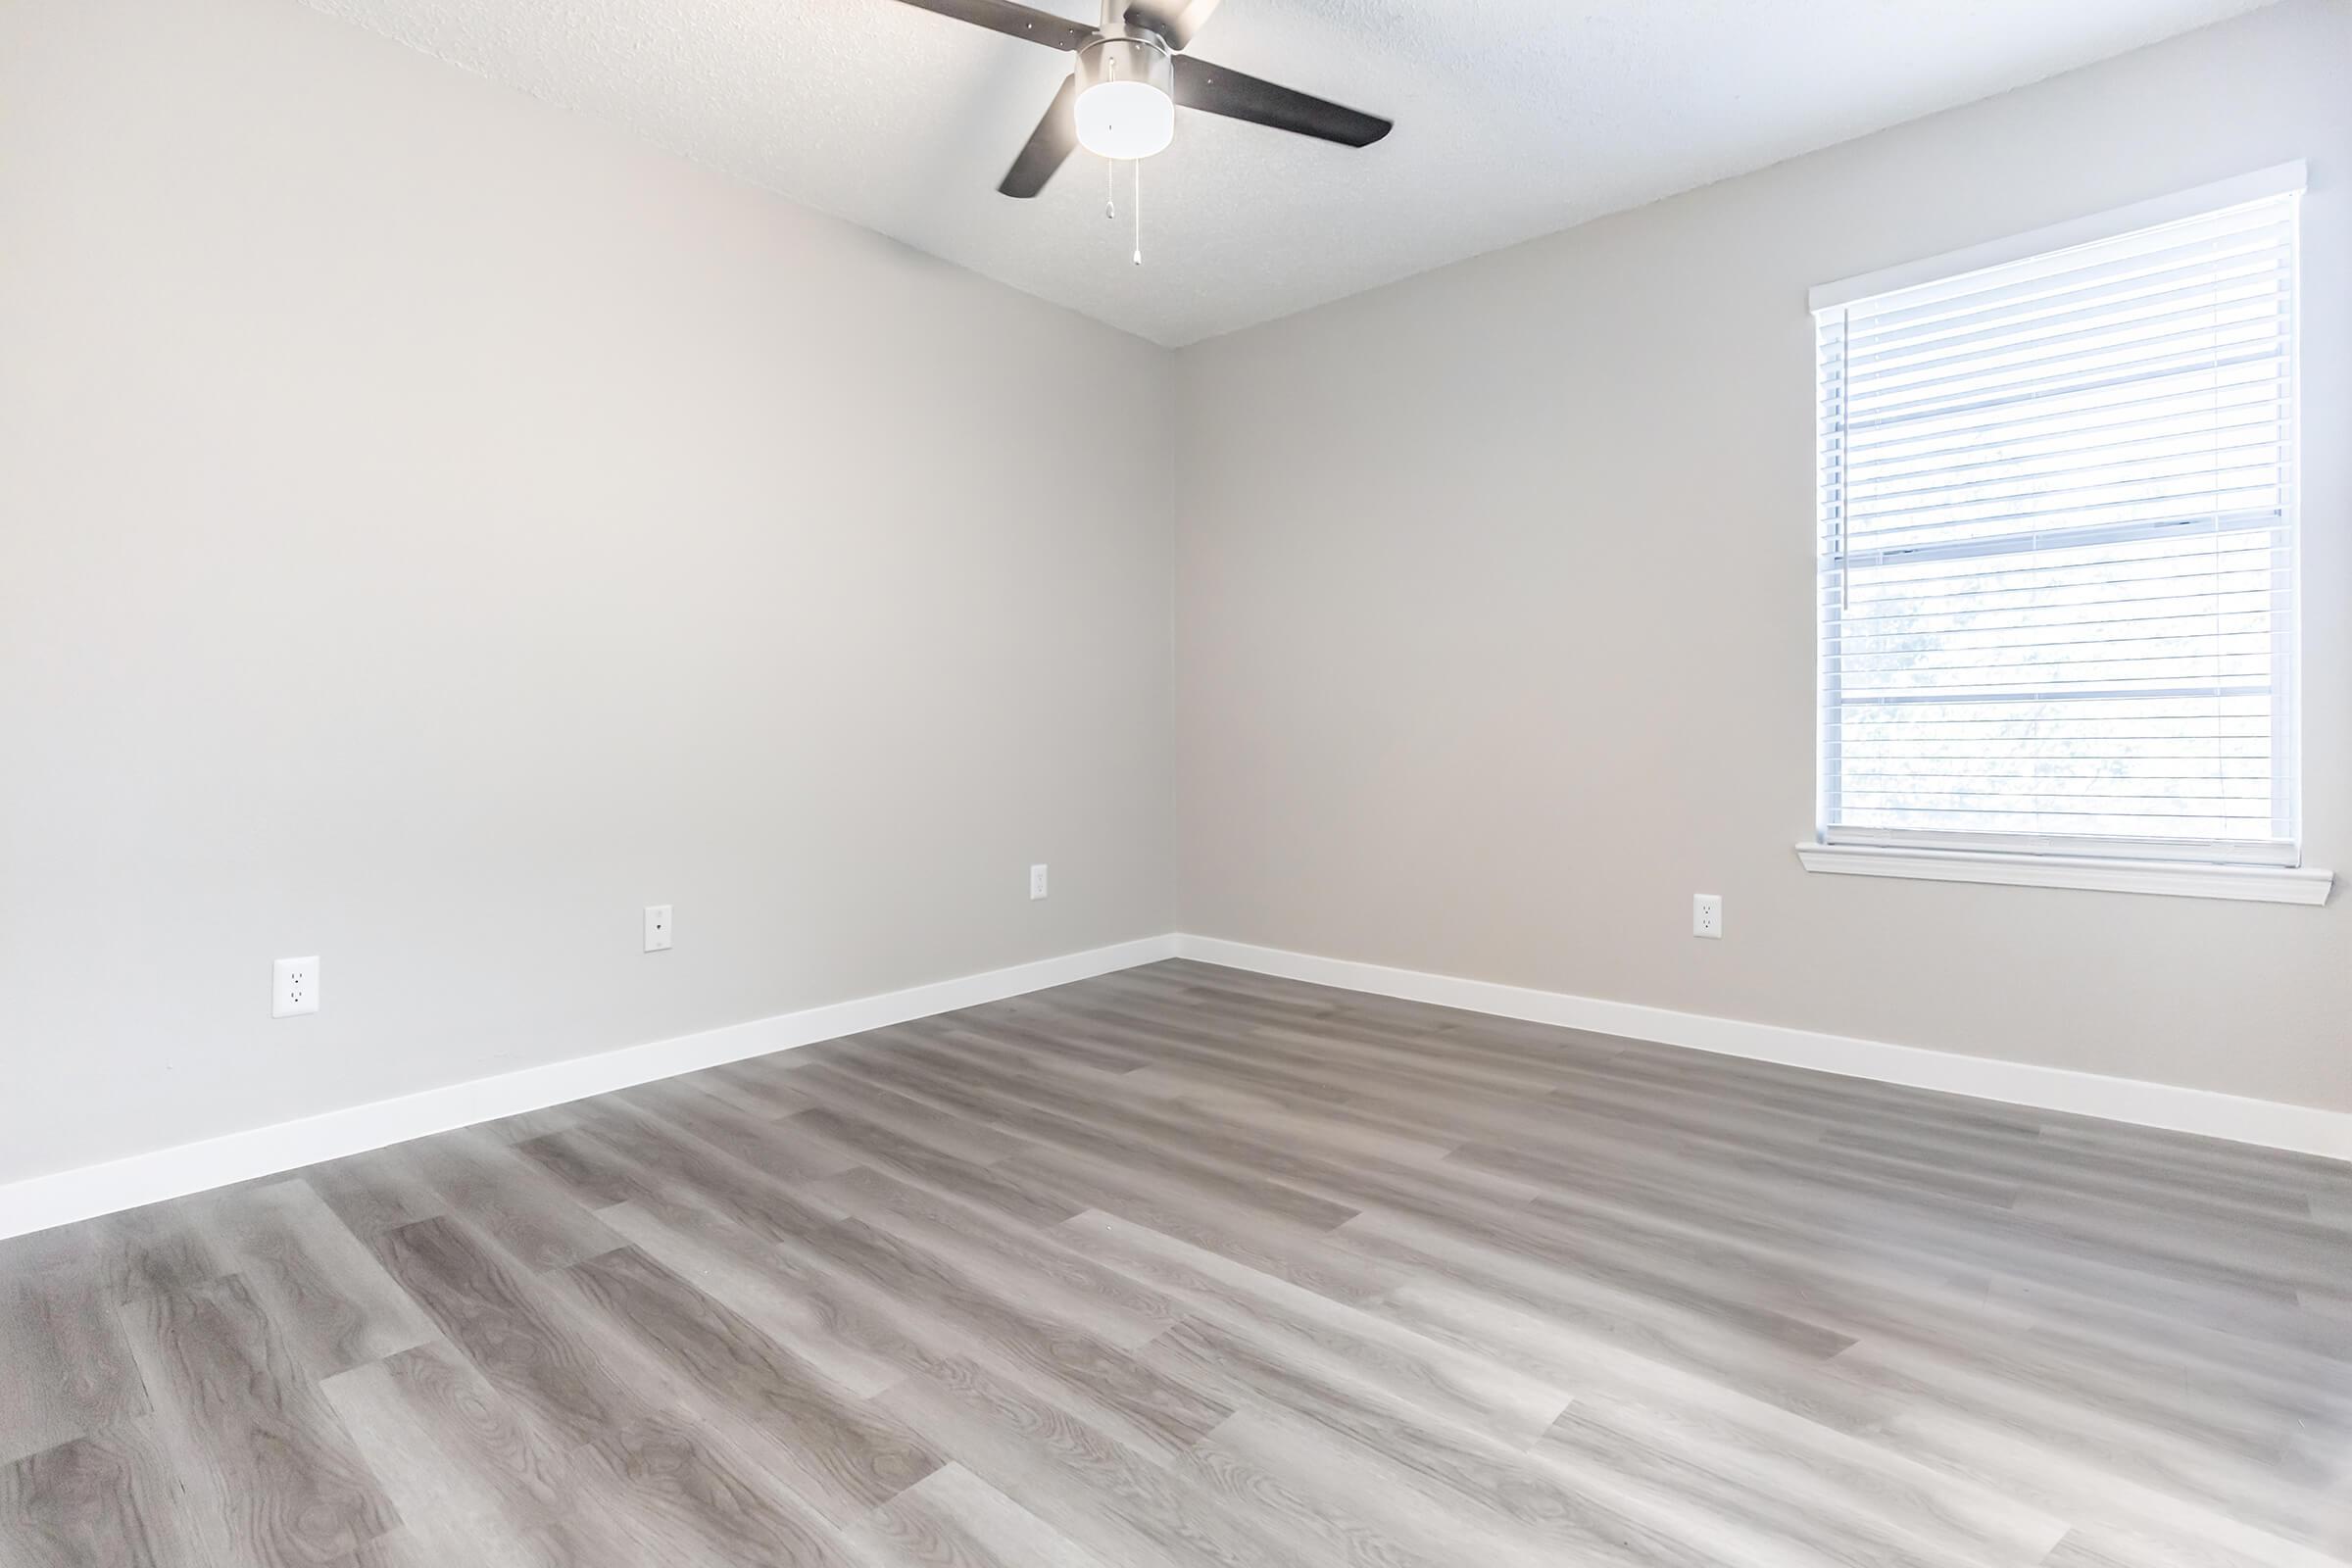 Empty Bedford, TX apartment bedroom with hardwood floors and a ceiling fan